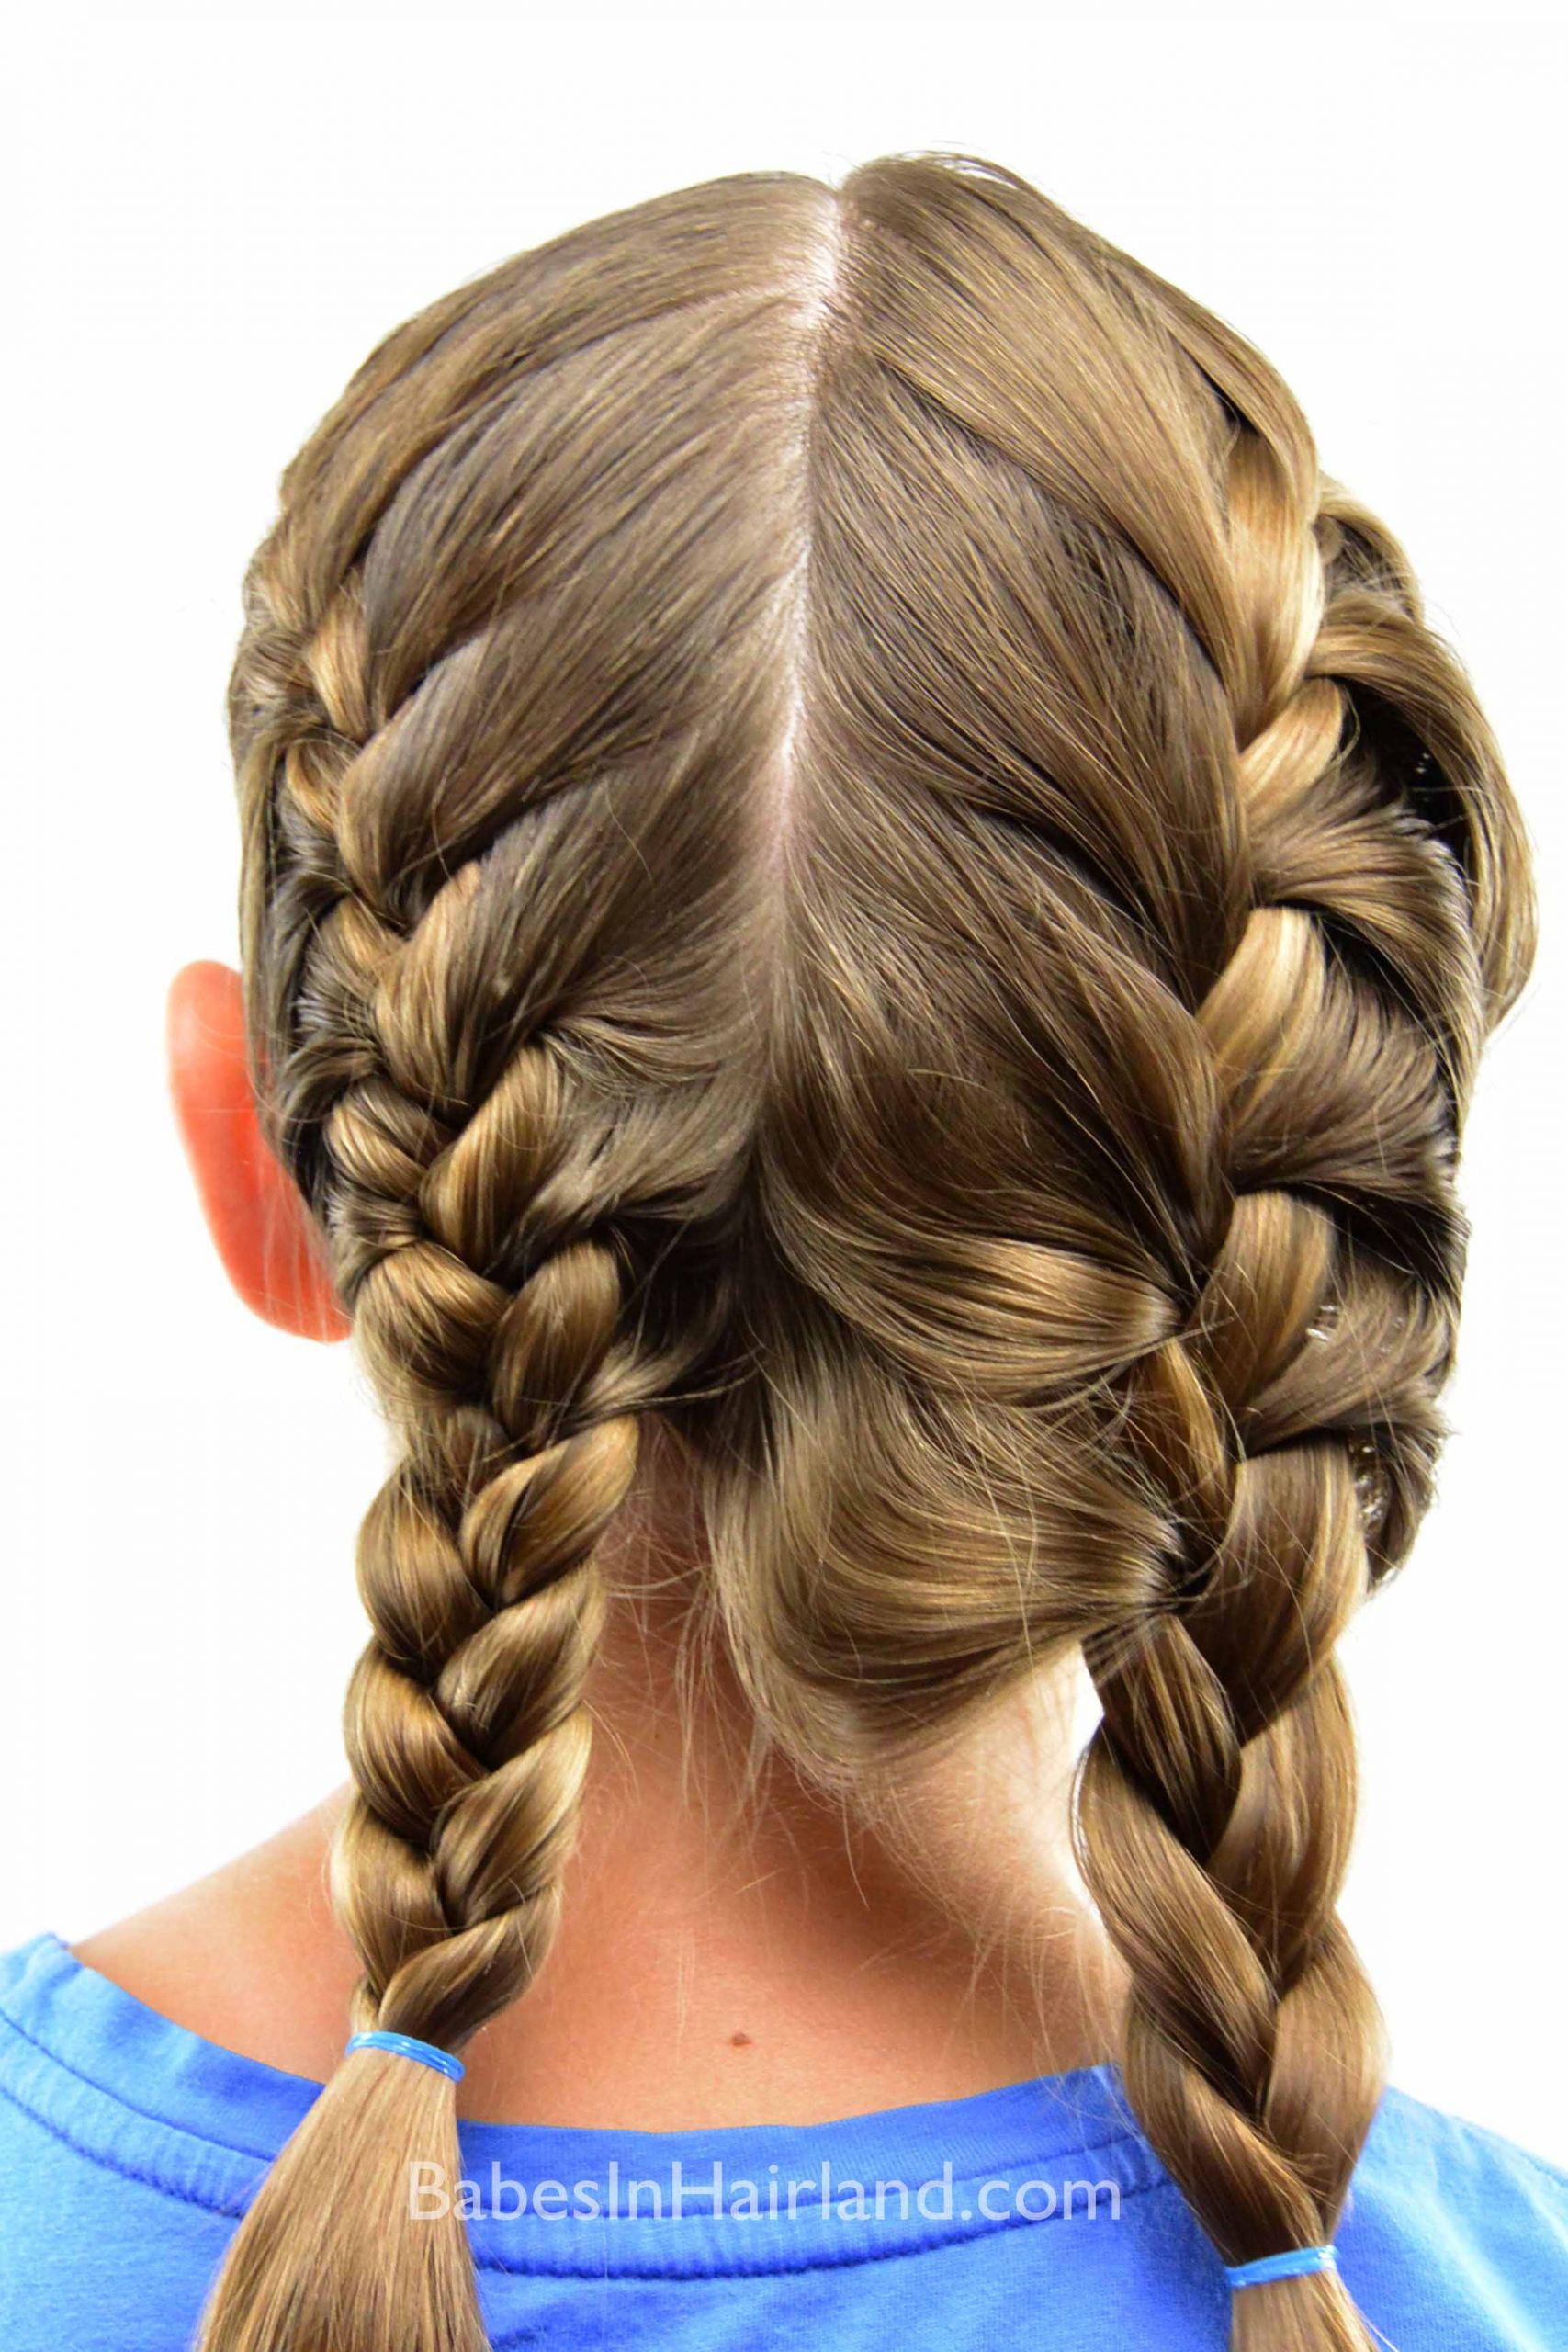 French Braids Hairstyles
 How to a Tight French Braid Babes In Hairland